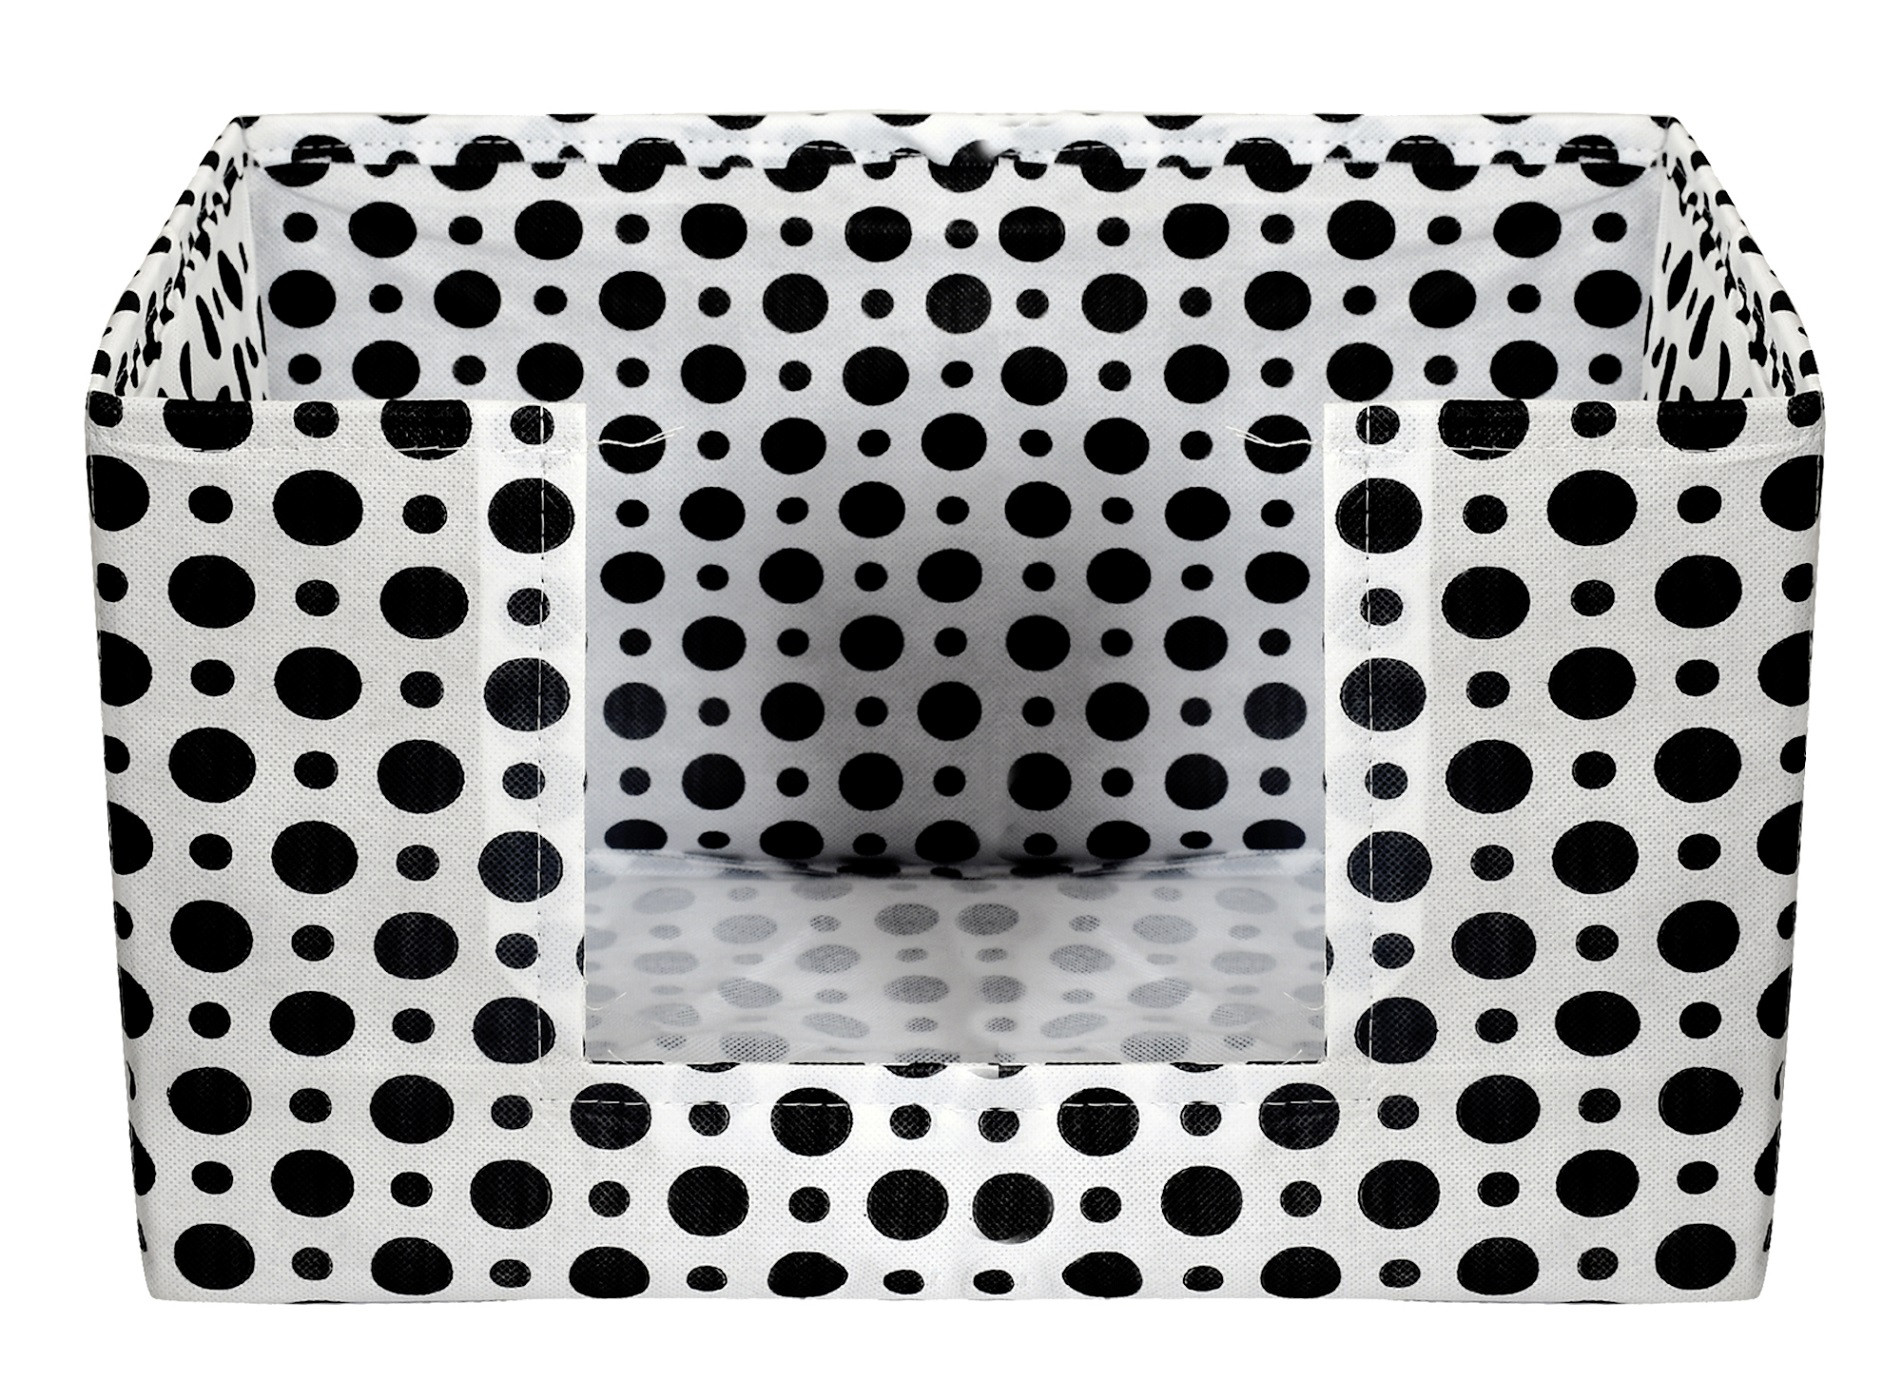 Kuber Industries Polka Dots Print Non-Woven Fabric Foldable Cloth Storage Boxes Organizer for Wardrobe With Handle (Black & White)